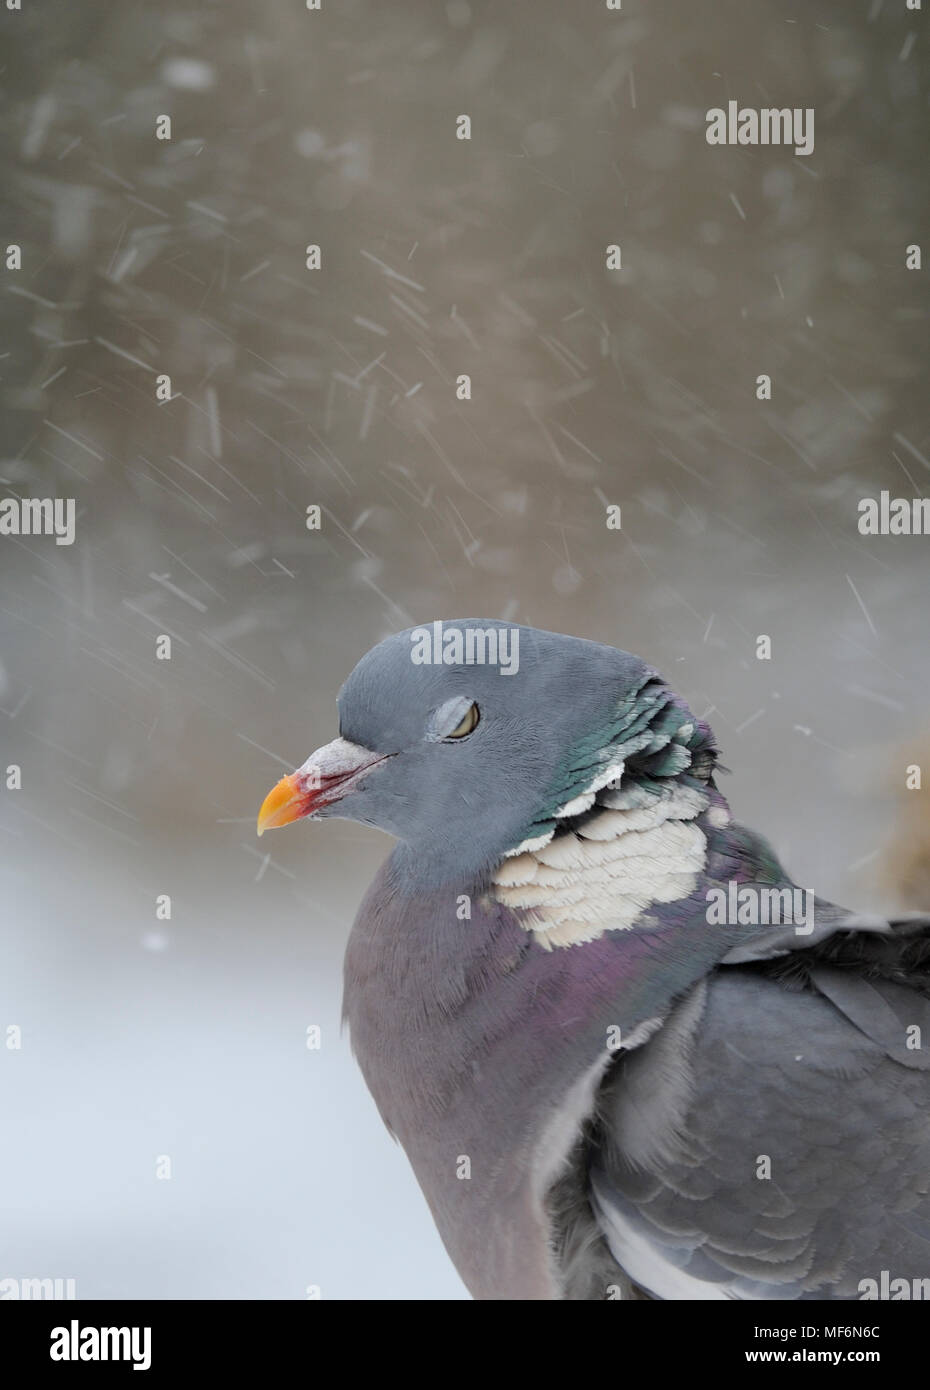 Woodpigeon in blizzard, blinking due to blowing snow Stock Photo